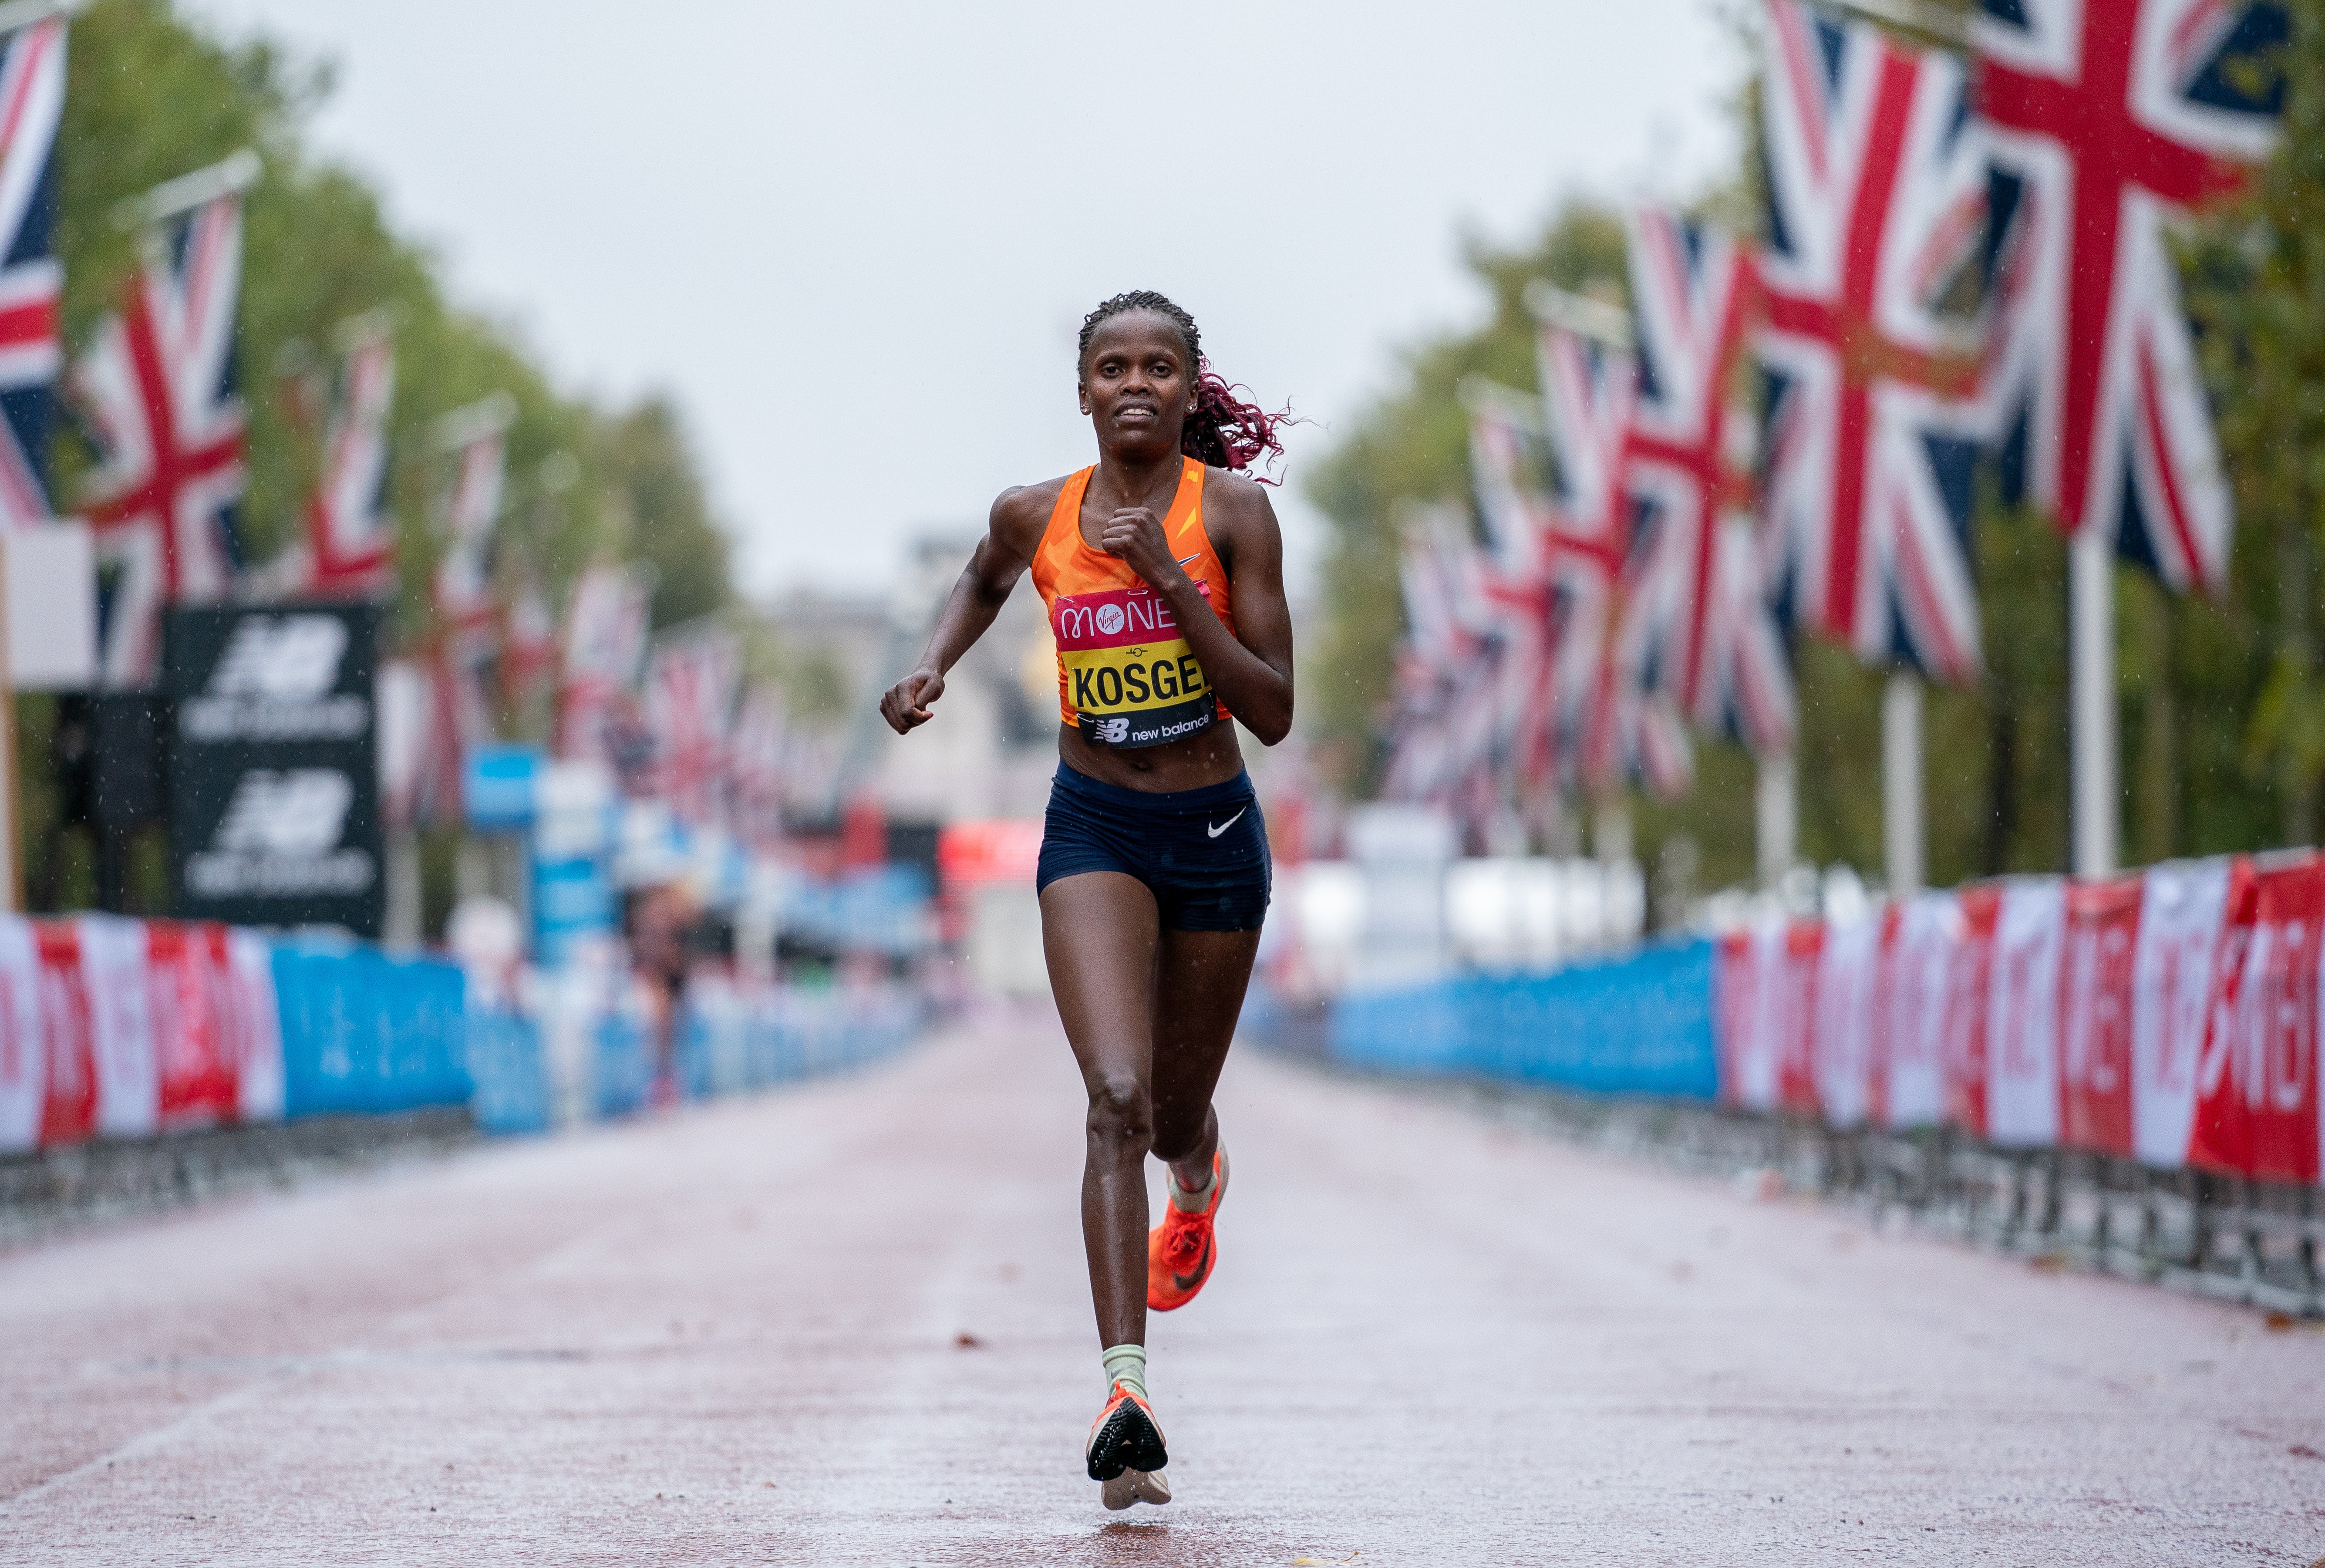 World record holder Brigid Kosgei powered to victory in the women's race